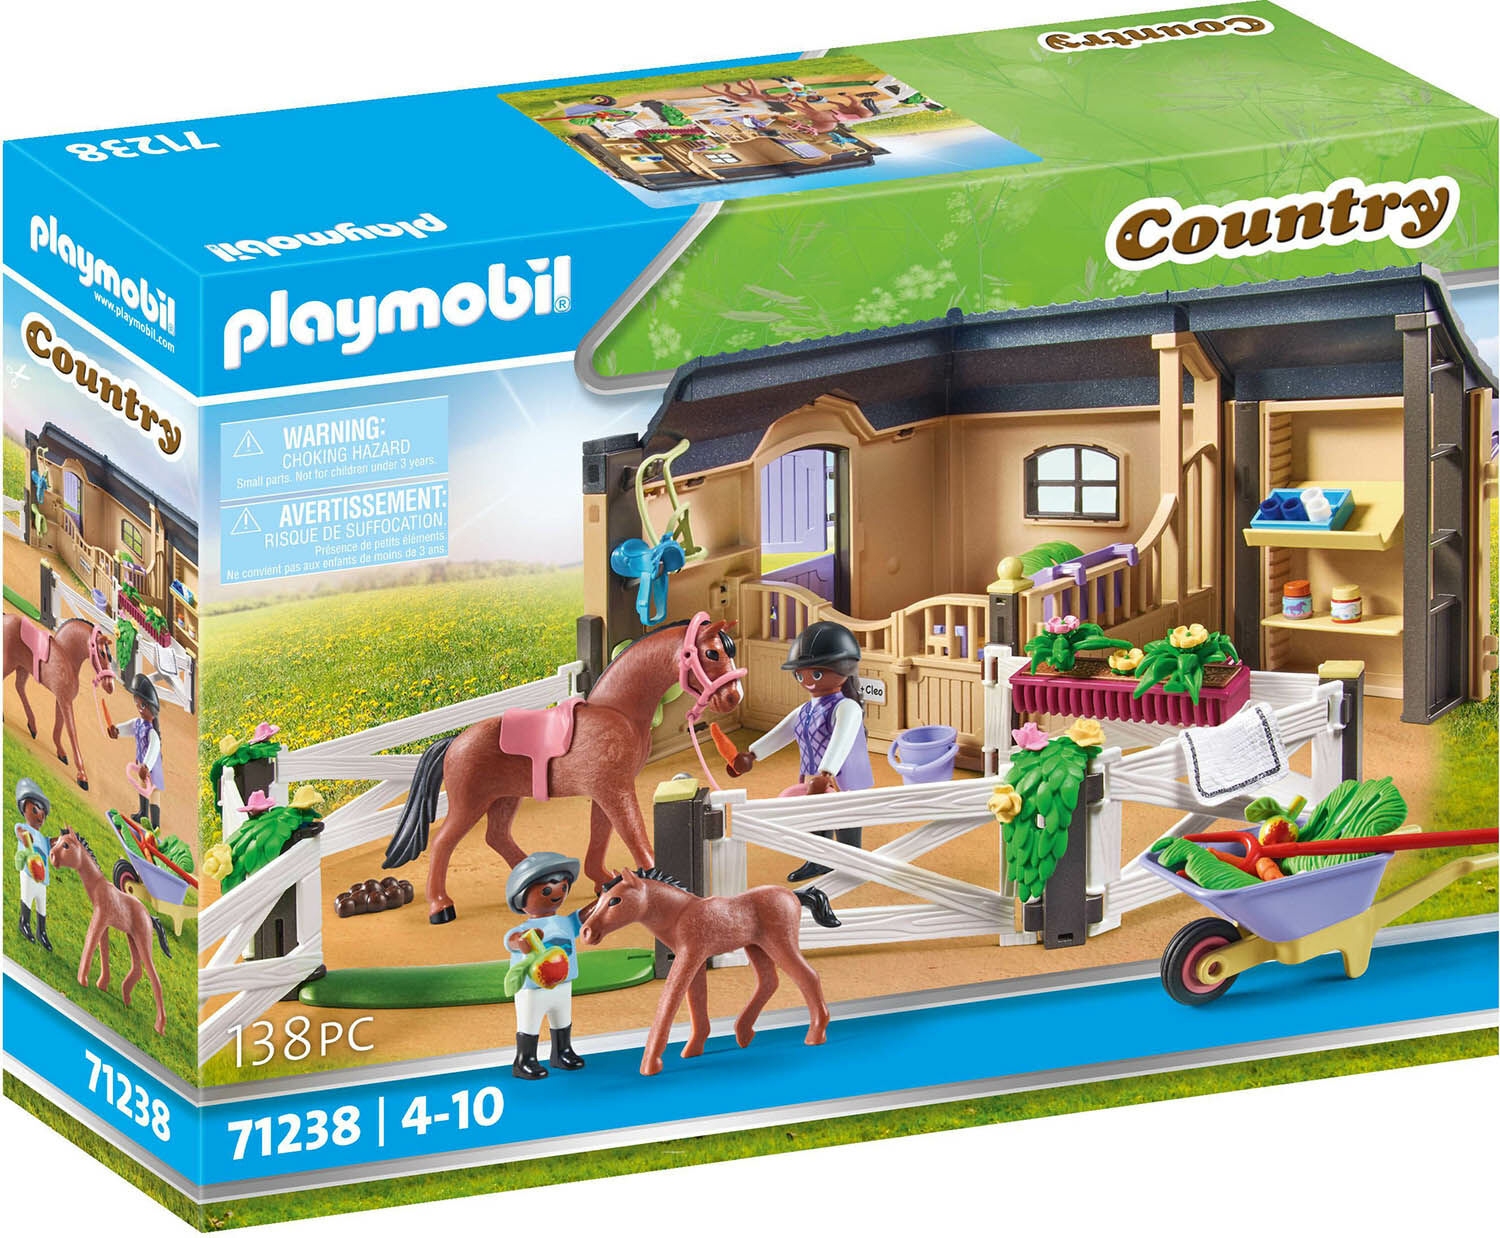 Playmobil 71238 Country Ridstall